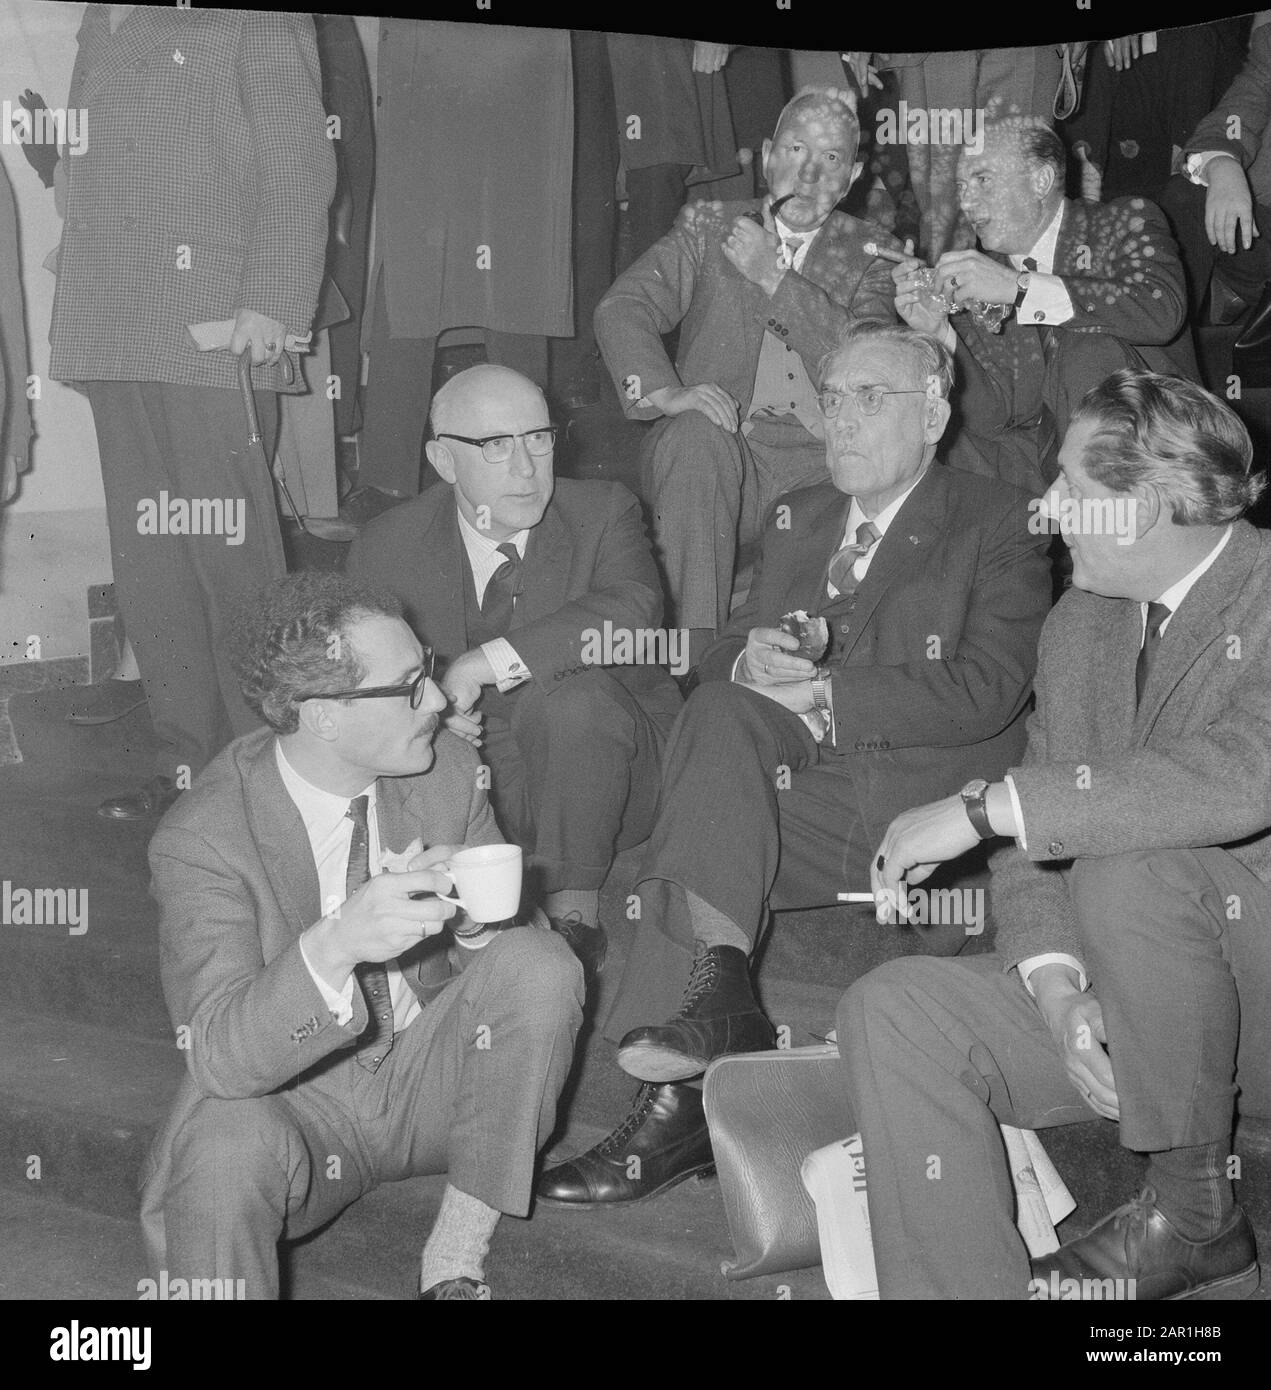 Election Congress of the PvdA in Nijmegen; dr. Drees (second from the right) in conversation with minister Samkalden (second from the left) during lunch Date: November 27, 1965 Location: Nijmegen Keywords: conferences, talks, ministers, politicians, political parties Personal name: Drees, Willem, Drees, Willem (sr.), Samkalden, Ivo Stock Photo